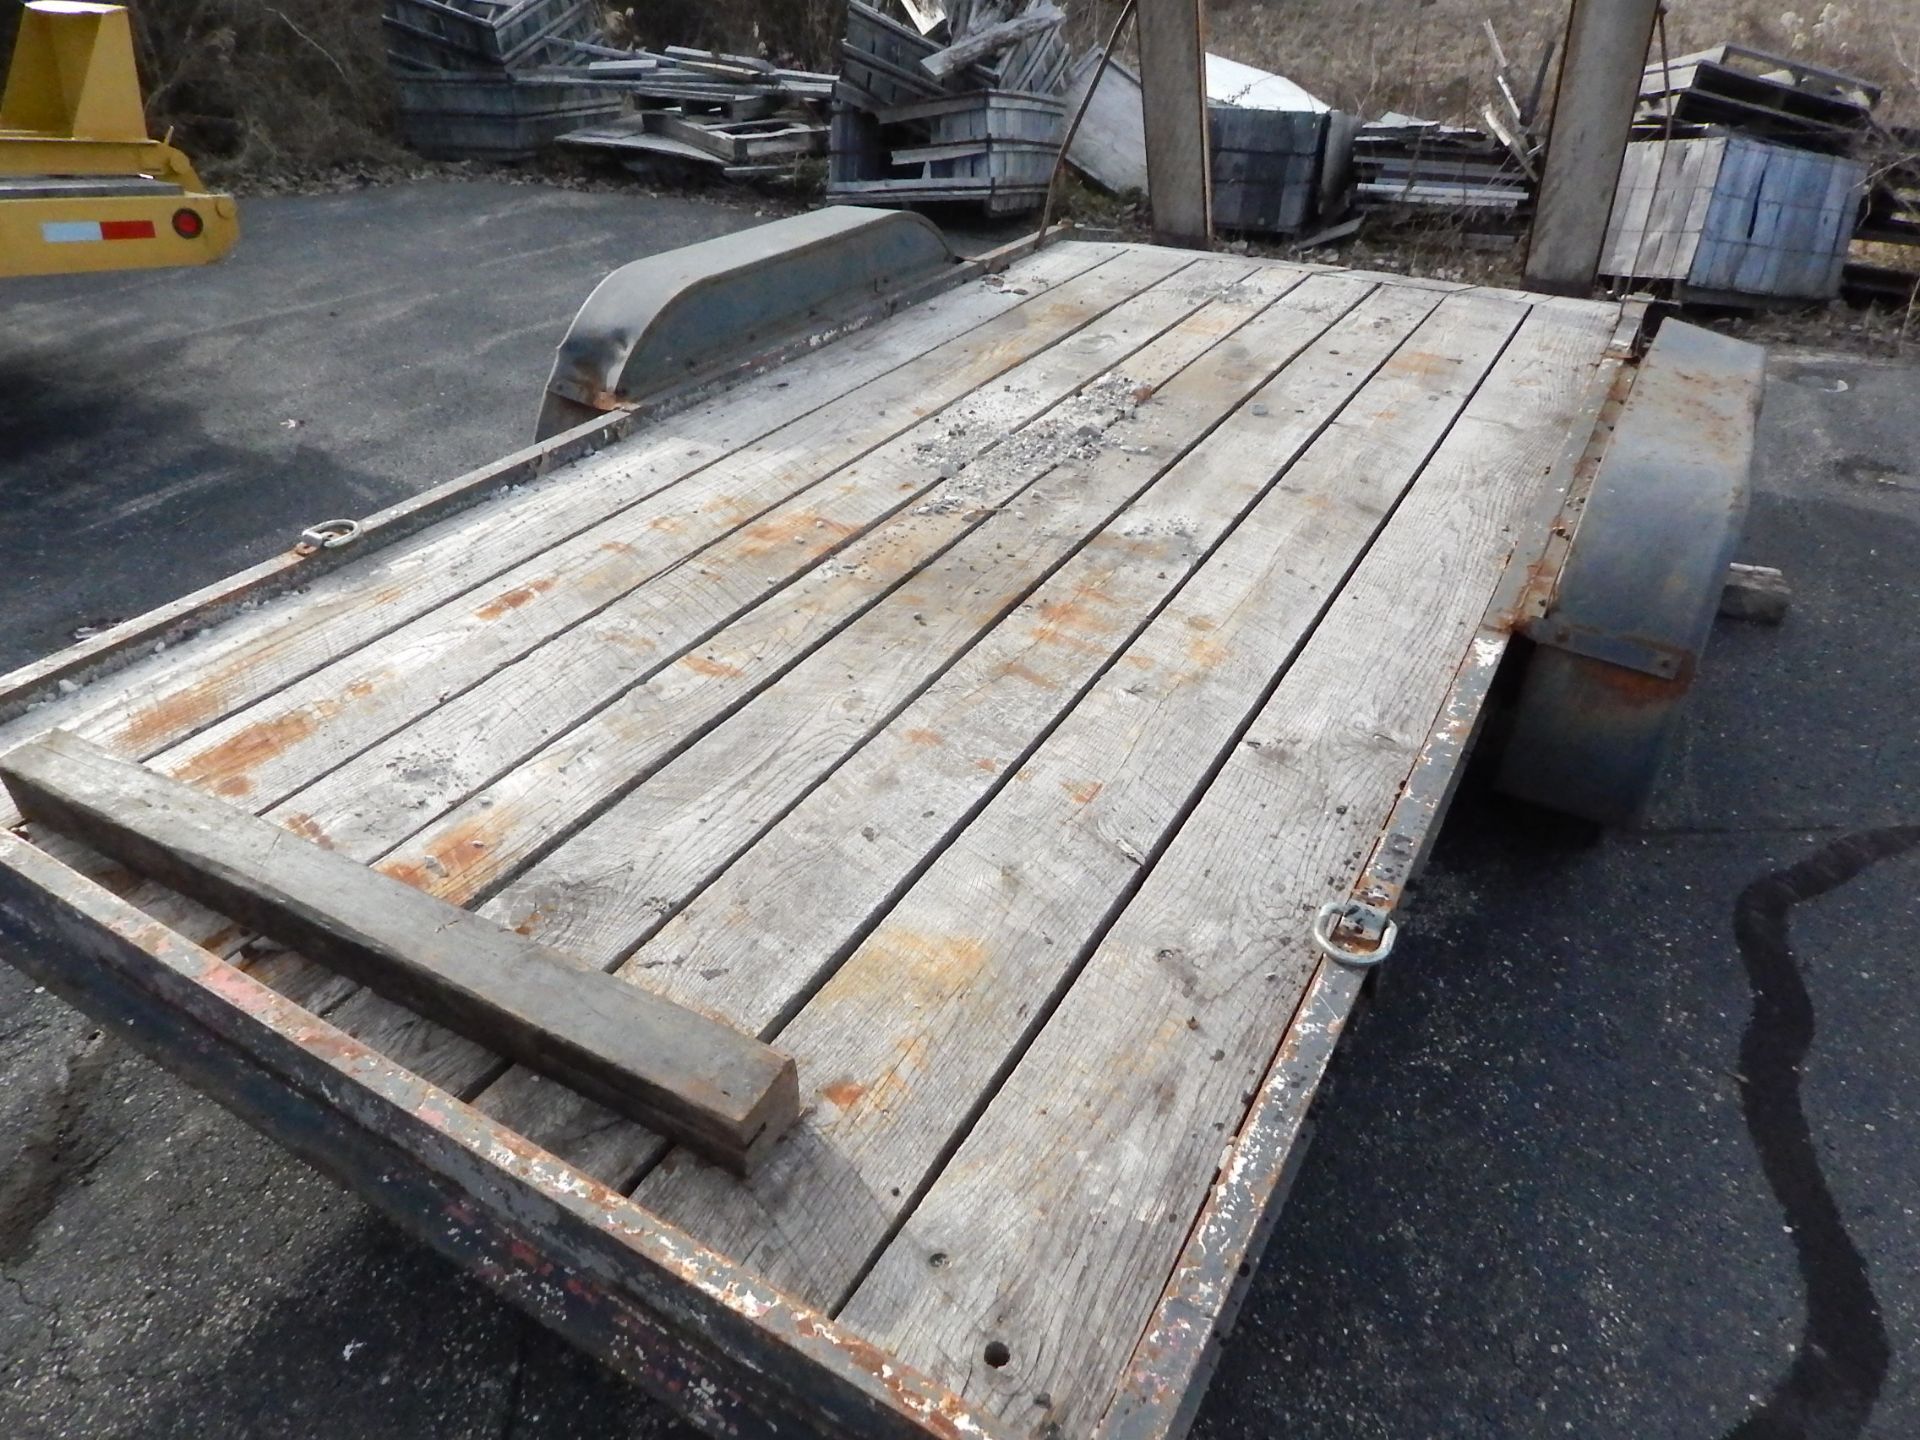 Tandem Axle Utility Trailer, 14 ft. Overall Length, 12 ft. Deck, 2 ft. Beavertail, Ramps, 72 in - Image 3 of 8